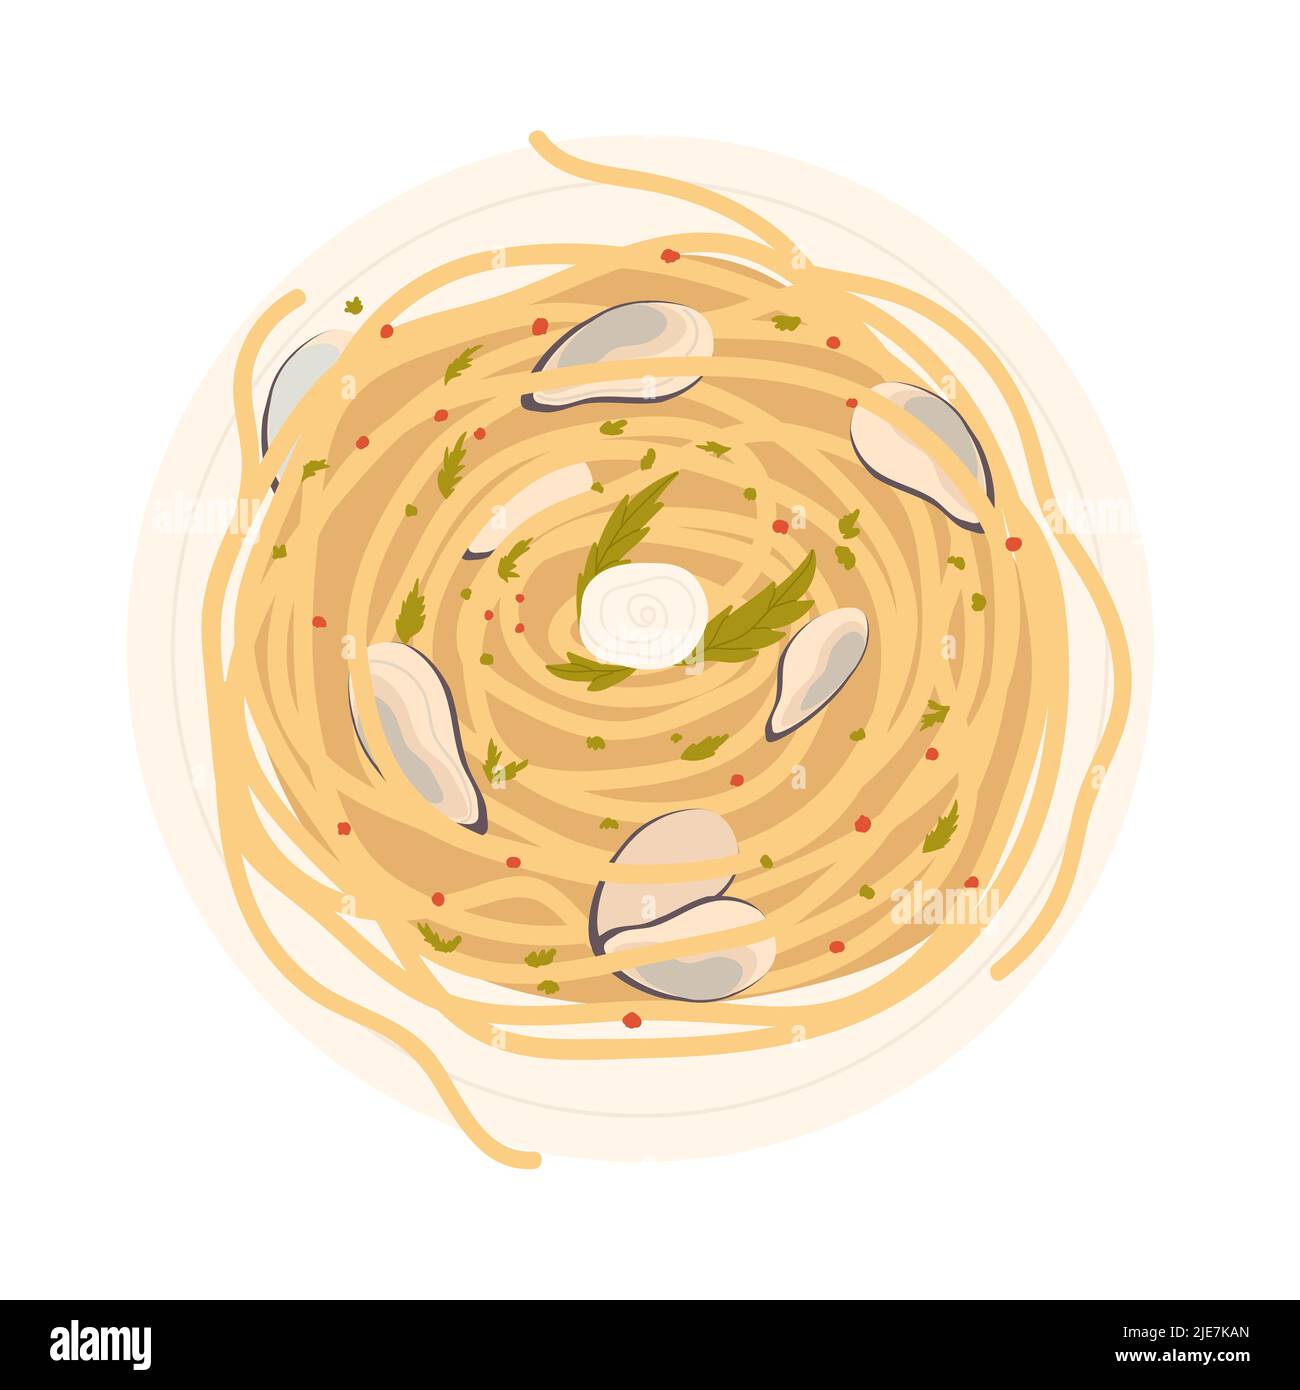 Pasta salad with seafood. Italian cuisine, lunch and dinner dish vector illustration Stock Vector